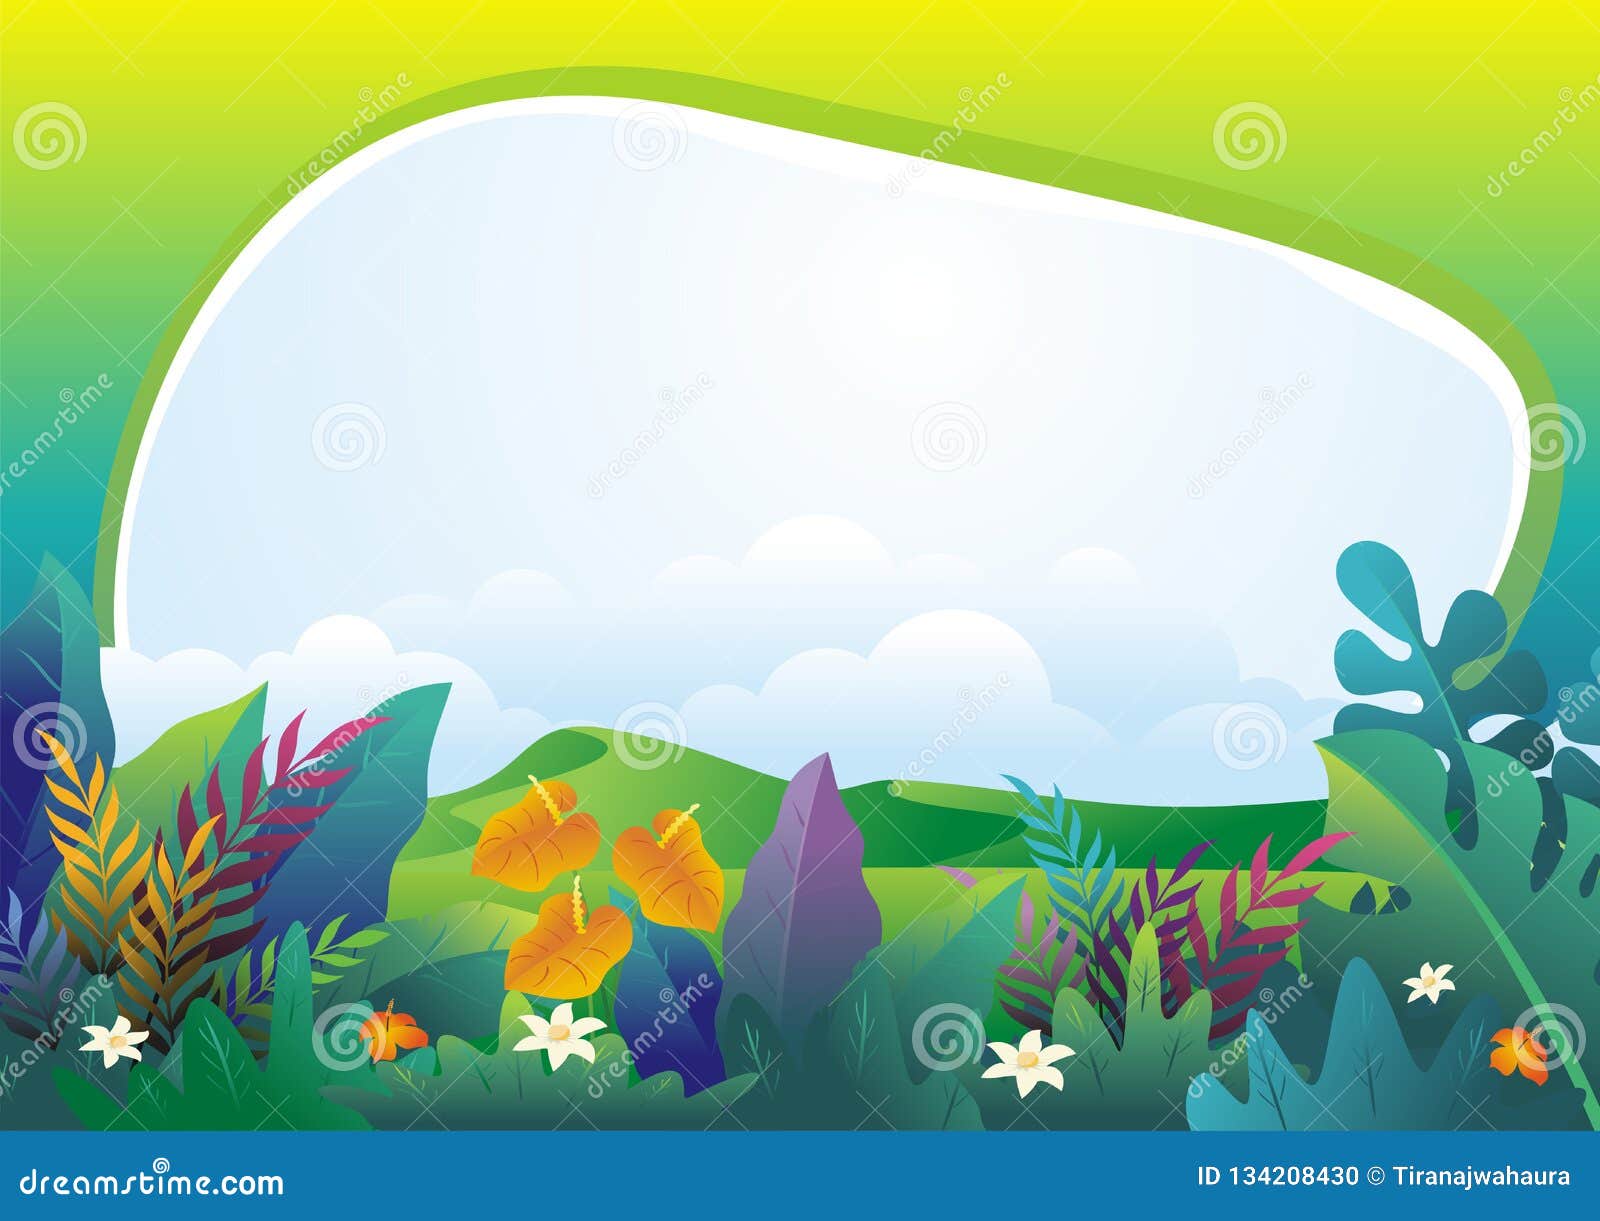 Nature Tropical Background with Stylish Design Stock Vector - of asia, achievement: 134208430